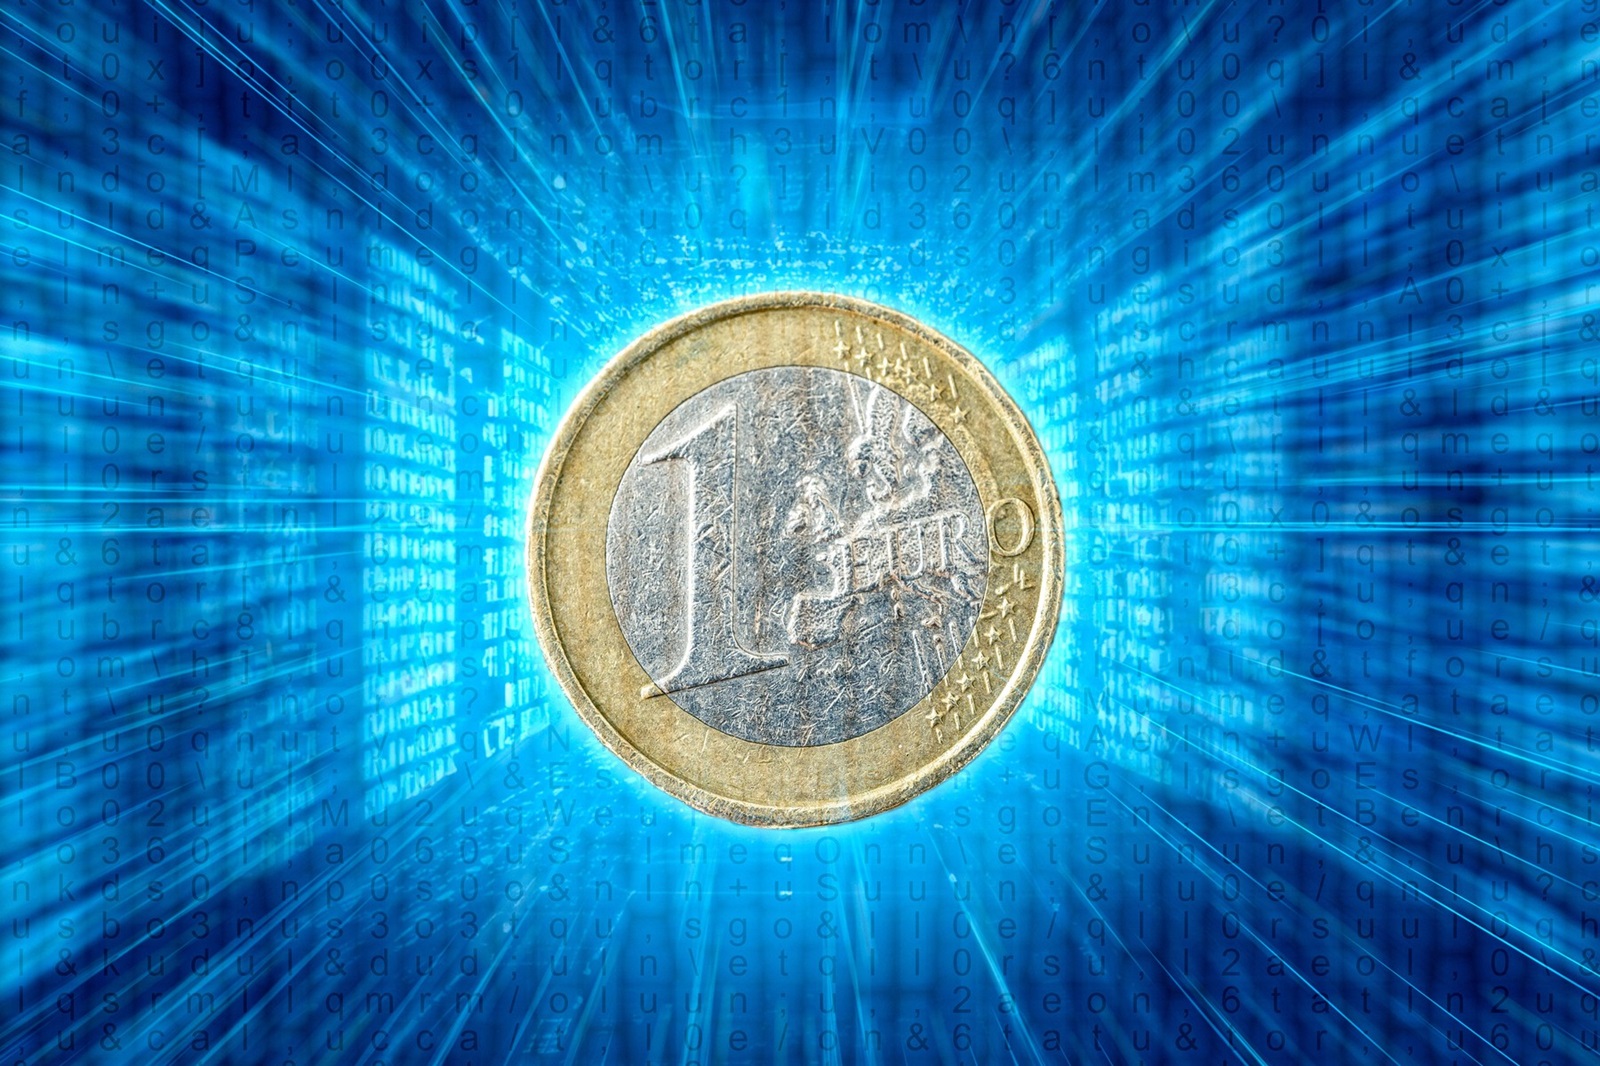 27 July 2023: A 1 euro coin in front of a digital blue space, Digital Currency Icon Image, Digital Euro PHOTOMONTAGE *** Eine 1-Euro-Münze vor einem digitalen blauen Raum, Symbolbild Digitale Währung, Digitaler Euro FOTOMONTAGE,Image: 792684176, License: Rights-managed, Restrictions: imago is entitled to issue a simple usage license at the time of provision. Personality and trademark rights as well as copyright laws regarding art-works shown must be observed. Commercial use at your own risk., Credit images as "Profimedia/ IMAGO", Model Release: no, Credit line: IMAGO / imago stock&people / Profimedia